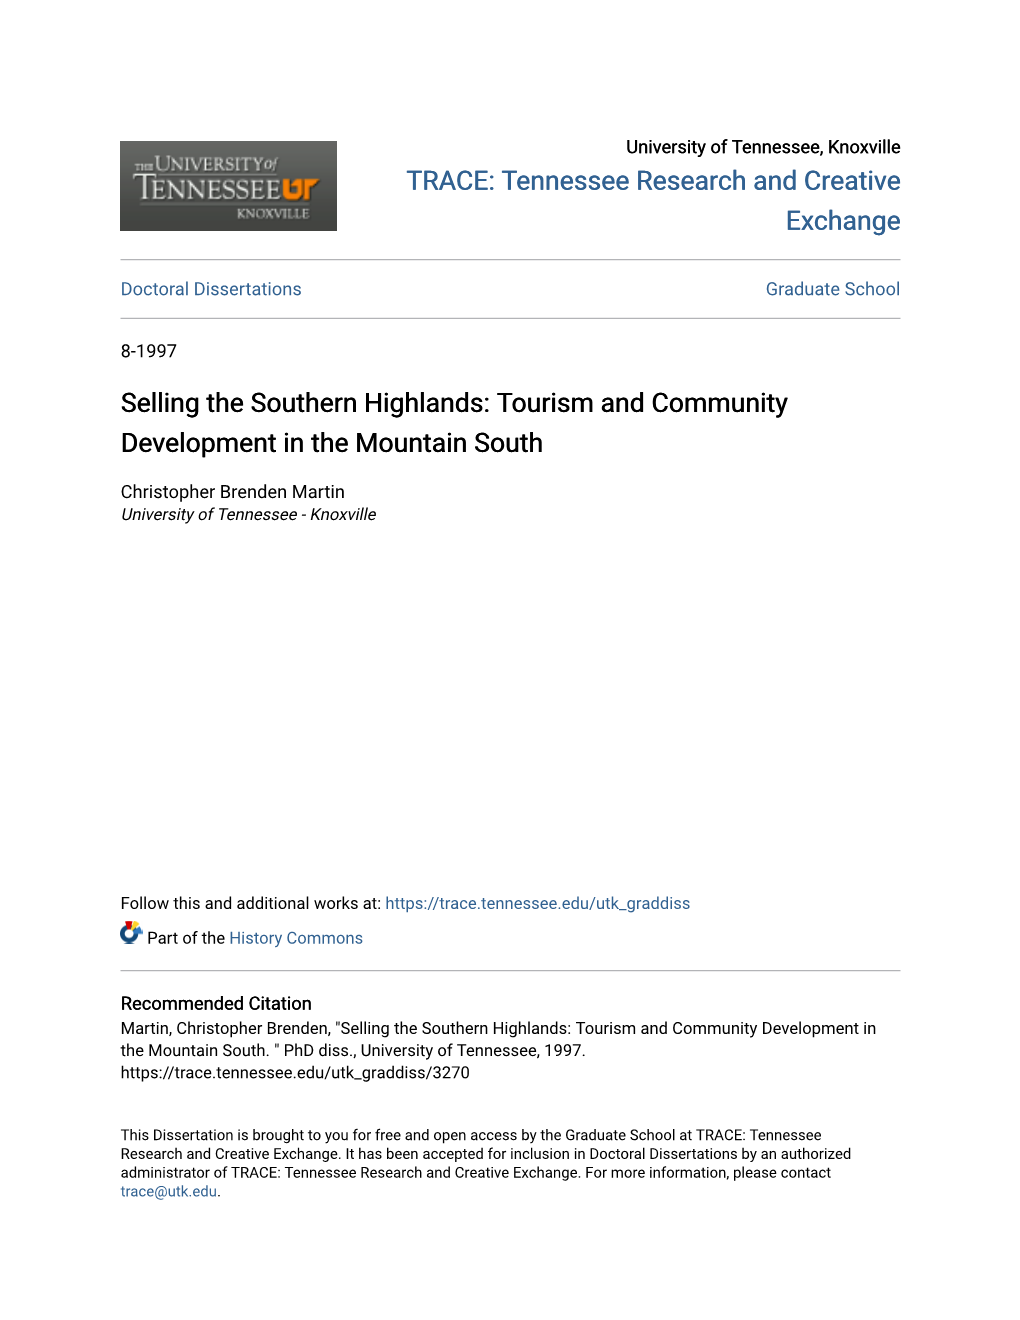 Selling the Southern Highlands: Tourism and Community Development in the Mountain South